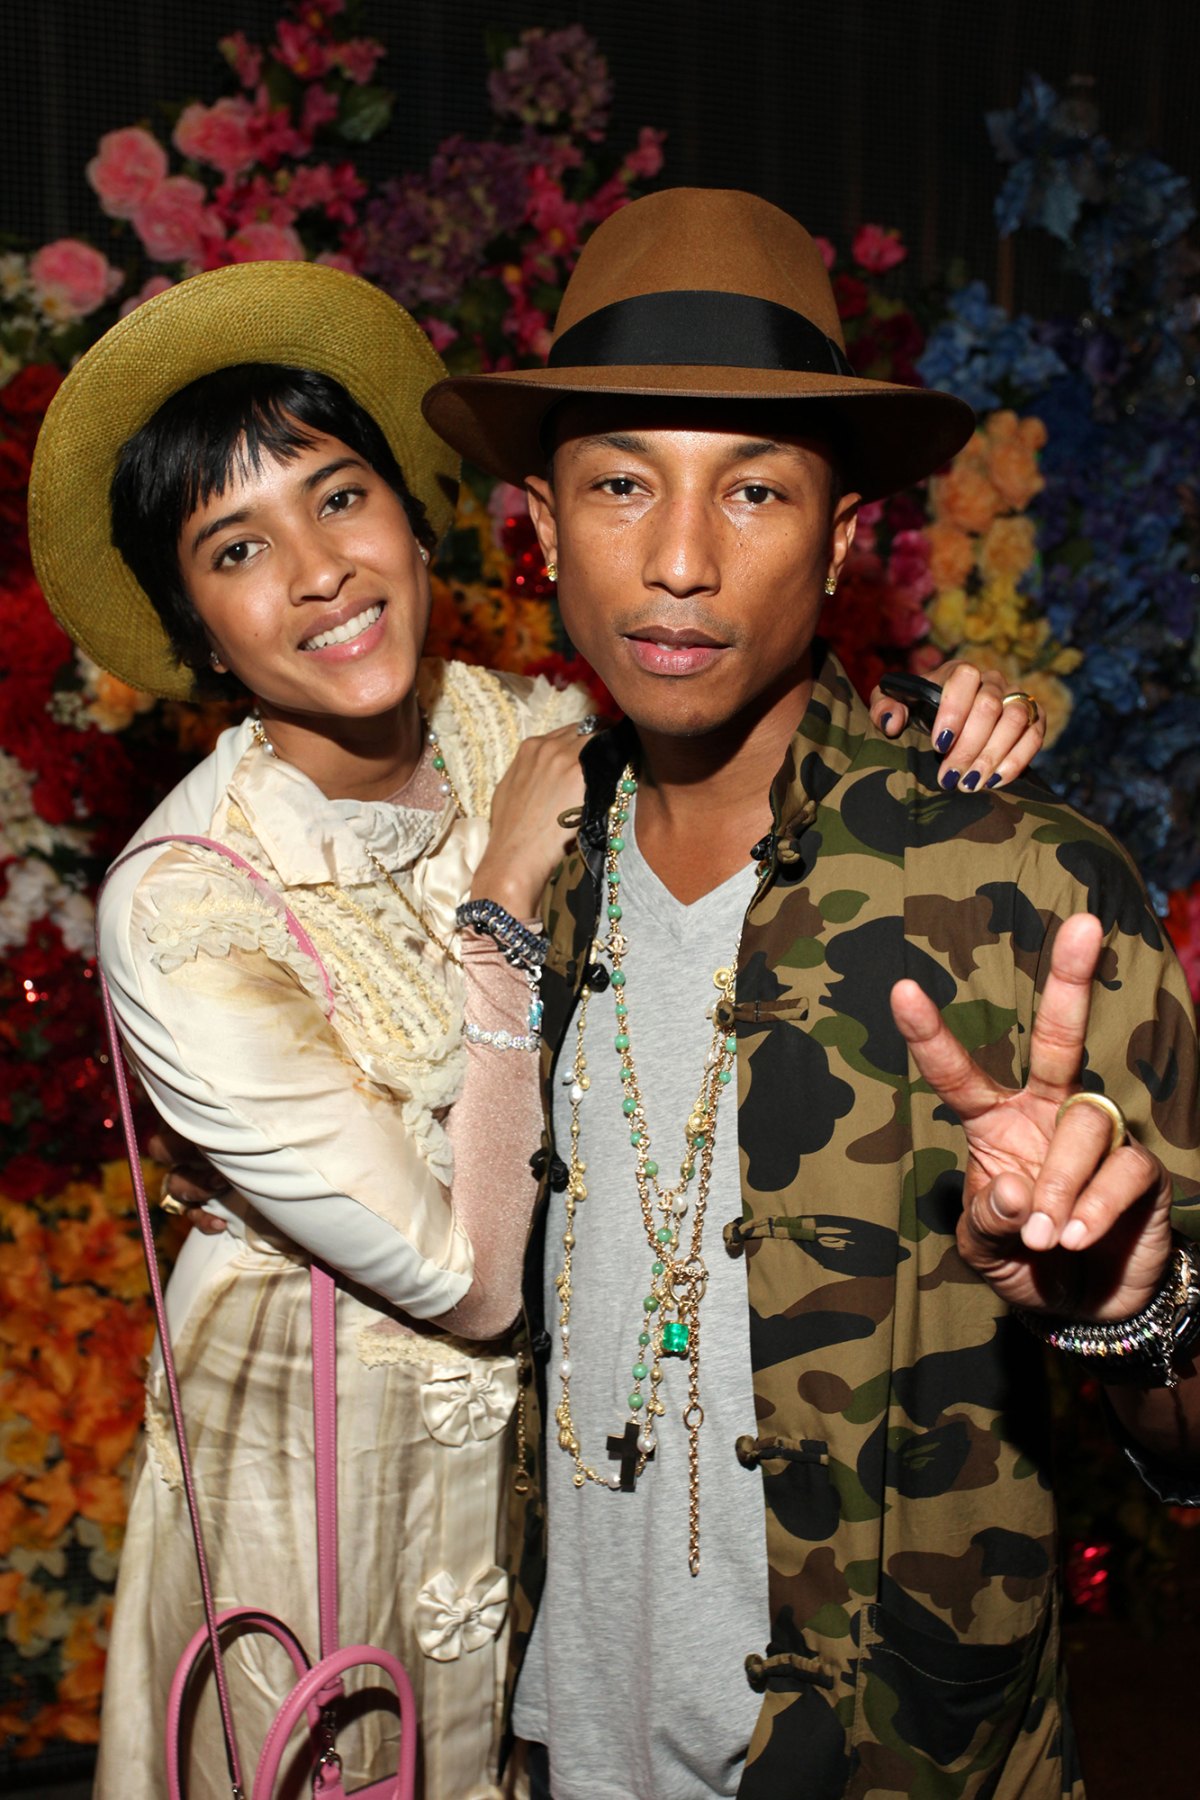 Pharrell Williams compares parenting triplets to working an assembly line